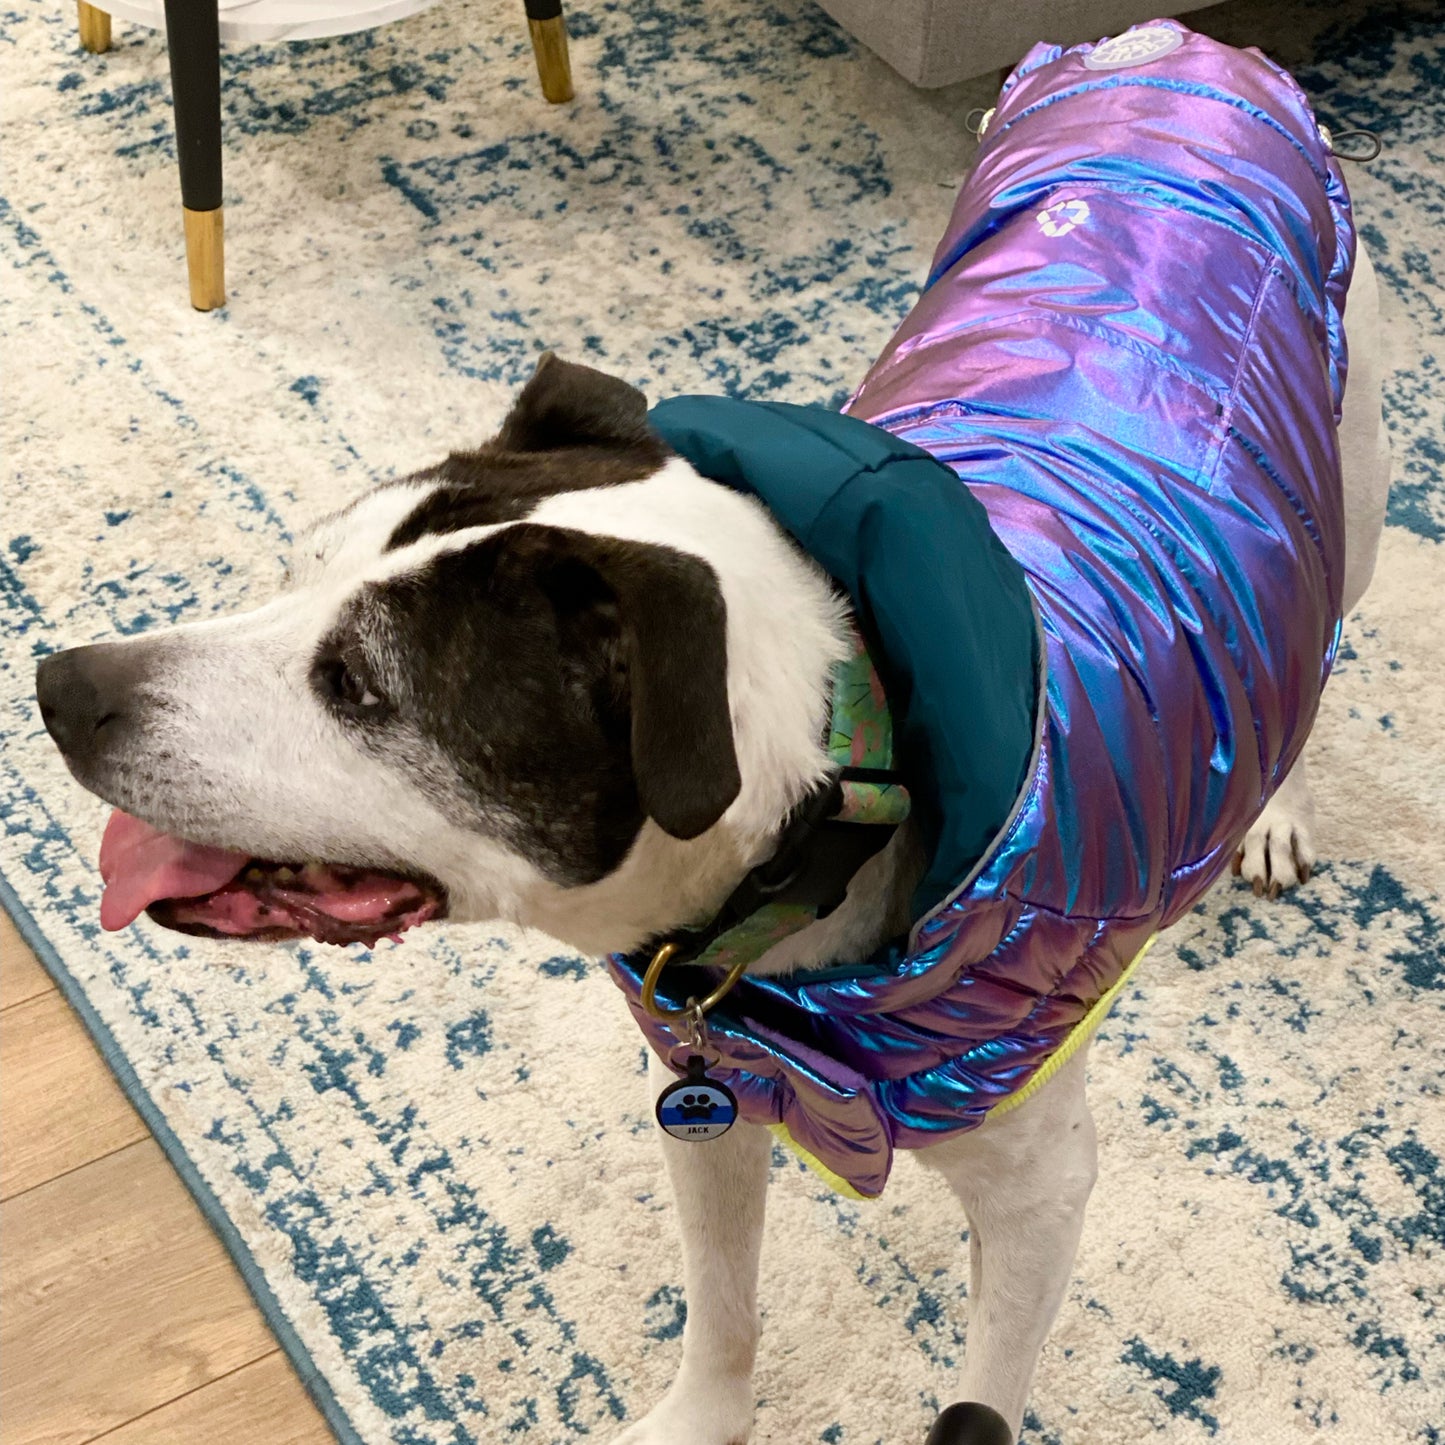 A white and black senior pit bull type dog wearing a blue iridescent puffer jacket, standing on a blue and white rug in a home